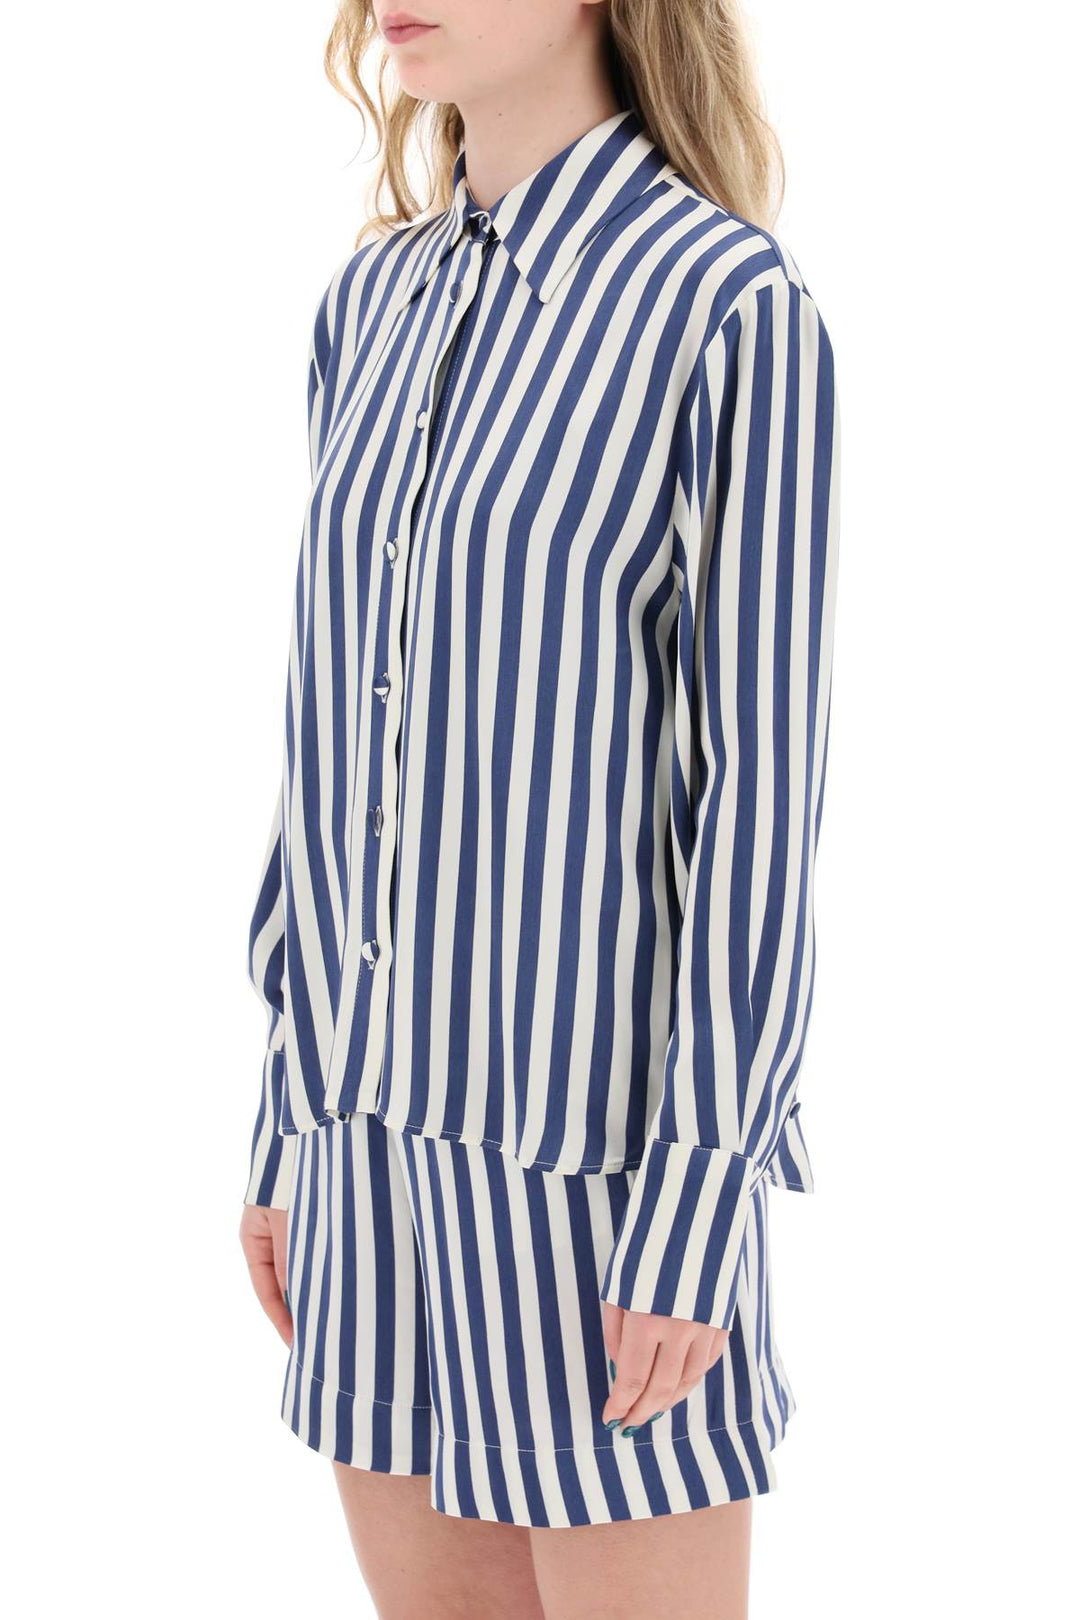 Mvp Wardrobe Replace With Double Quotestriped Charmeuse Shirt By Le   Bianco